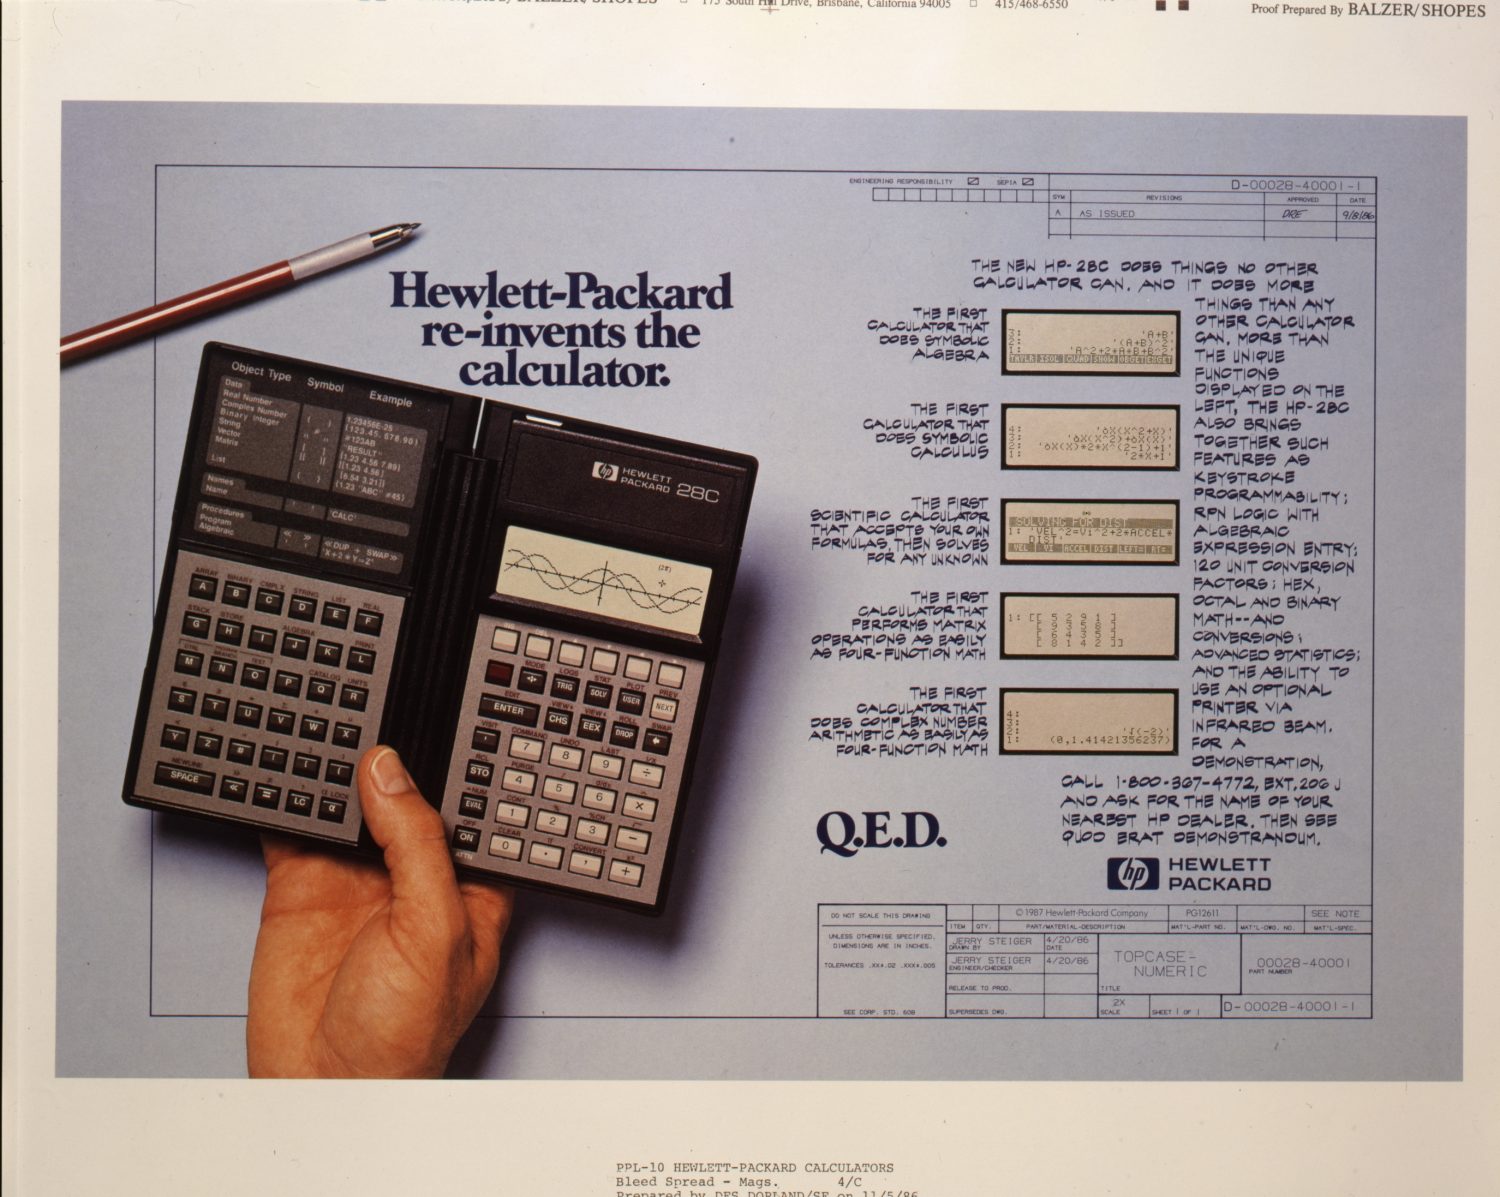 An ad for the HP 28C highlighting its innovations with the tagline Hewlett-Packard re-invents the calculator.